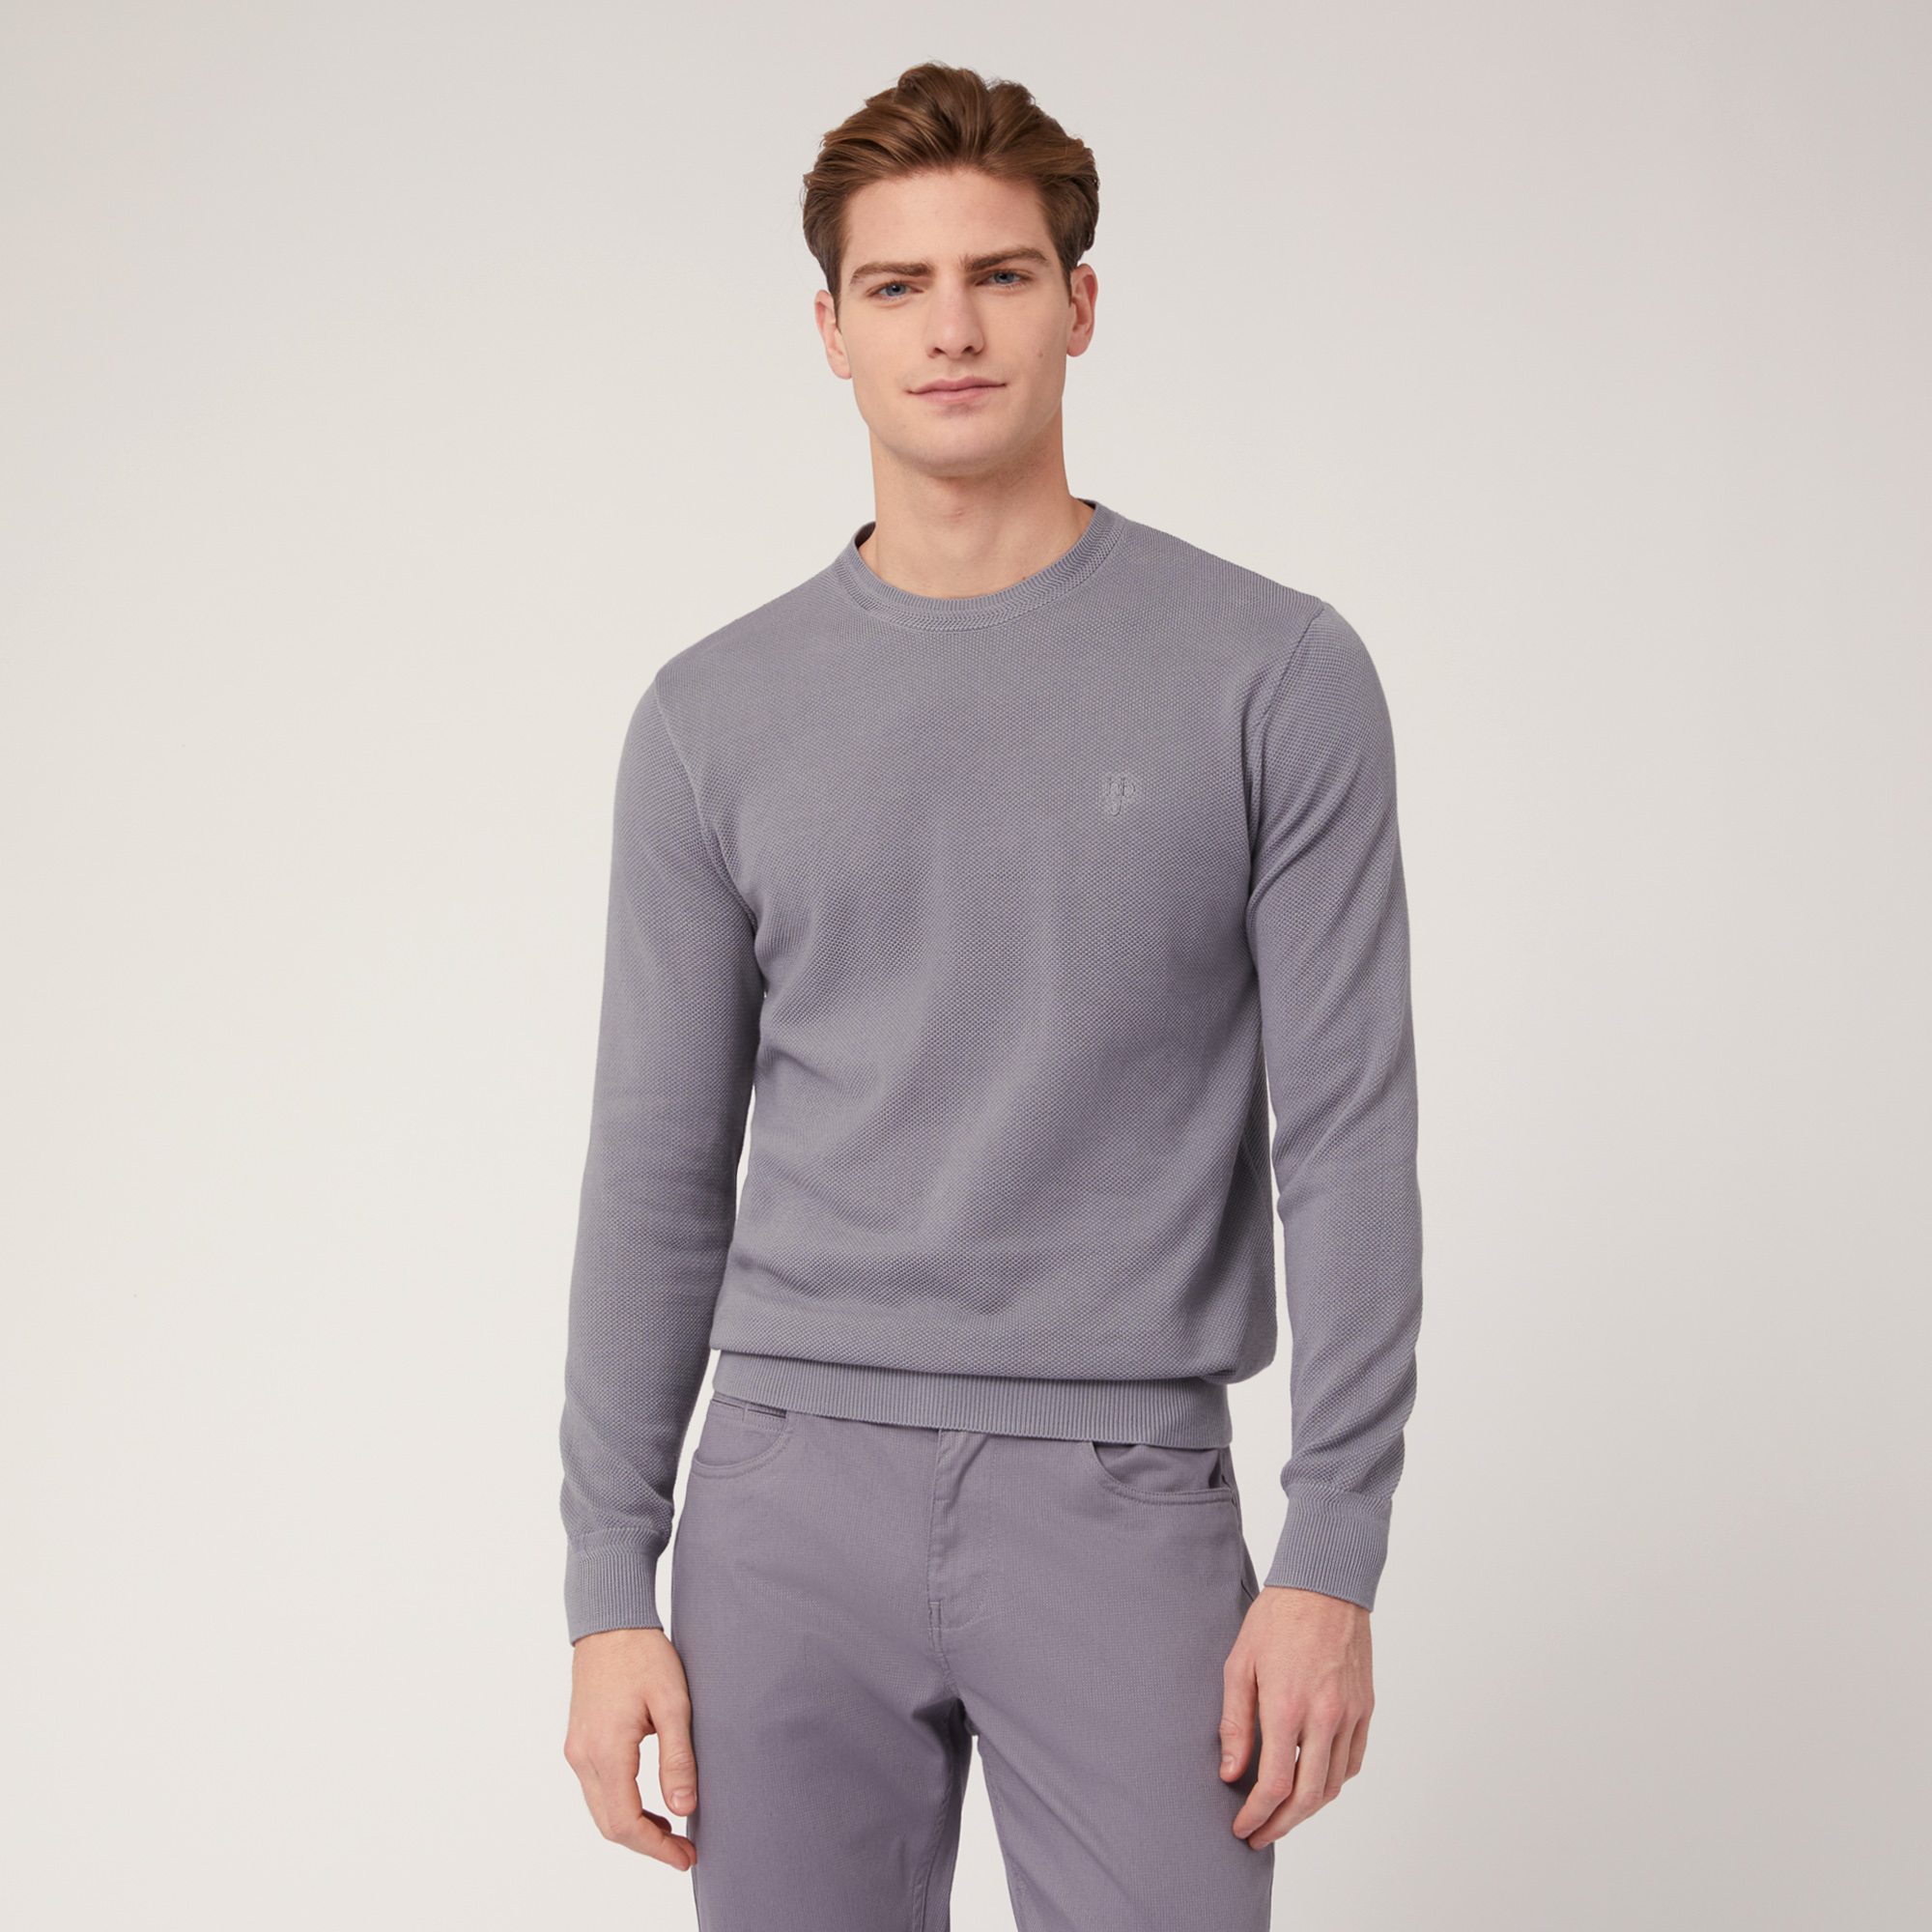 Pullover Girocollo Texture 3D, Grigio, large image number 0